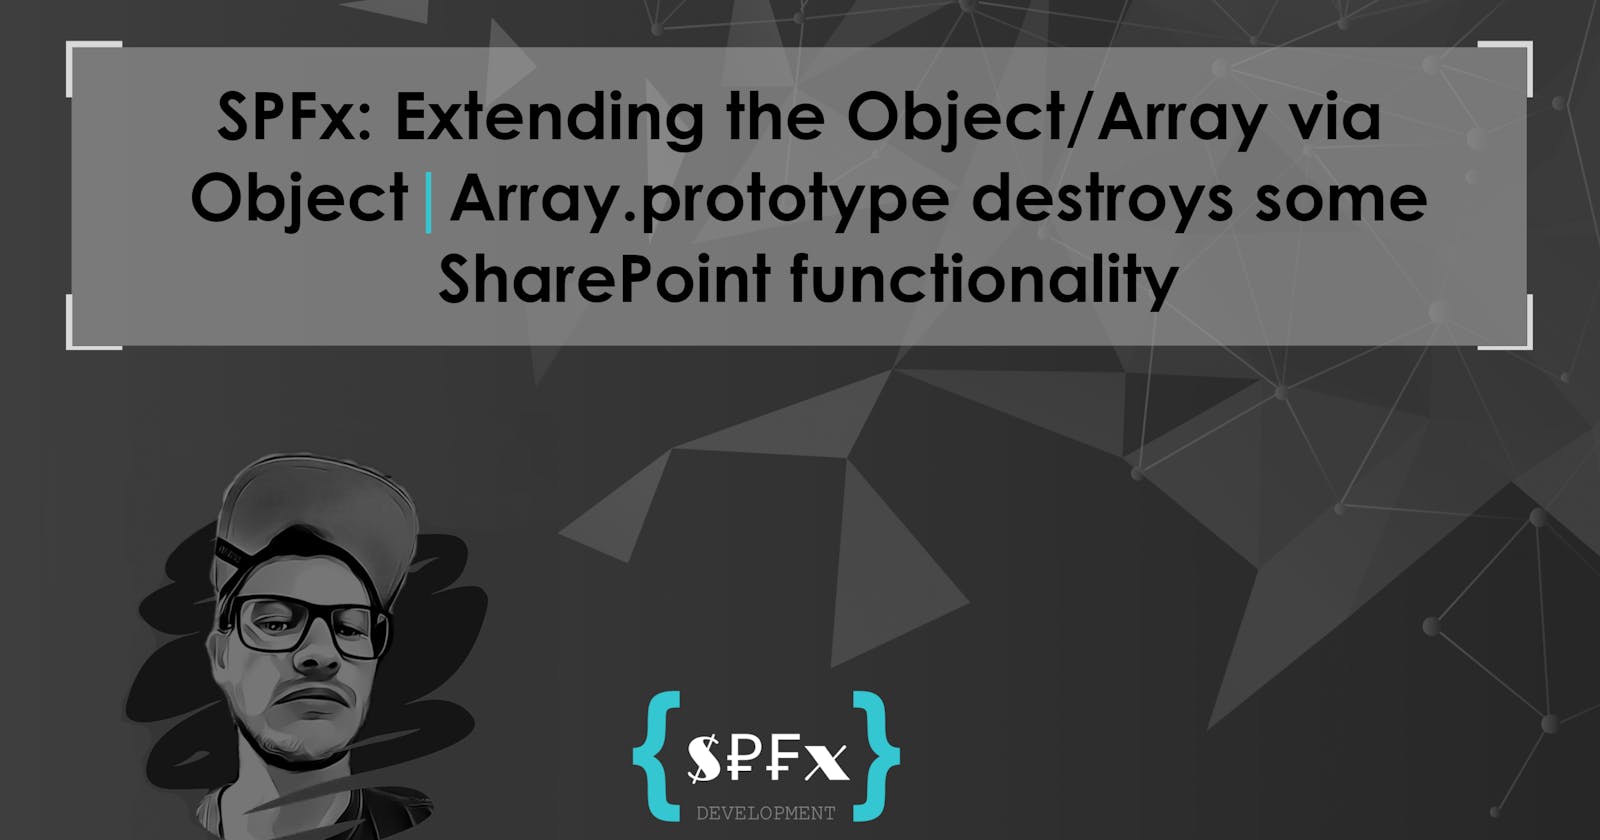 SPFx: Extending the Object/Array via Object|Array.prototype destroys some SharePoint functionality